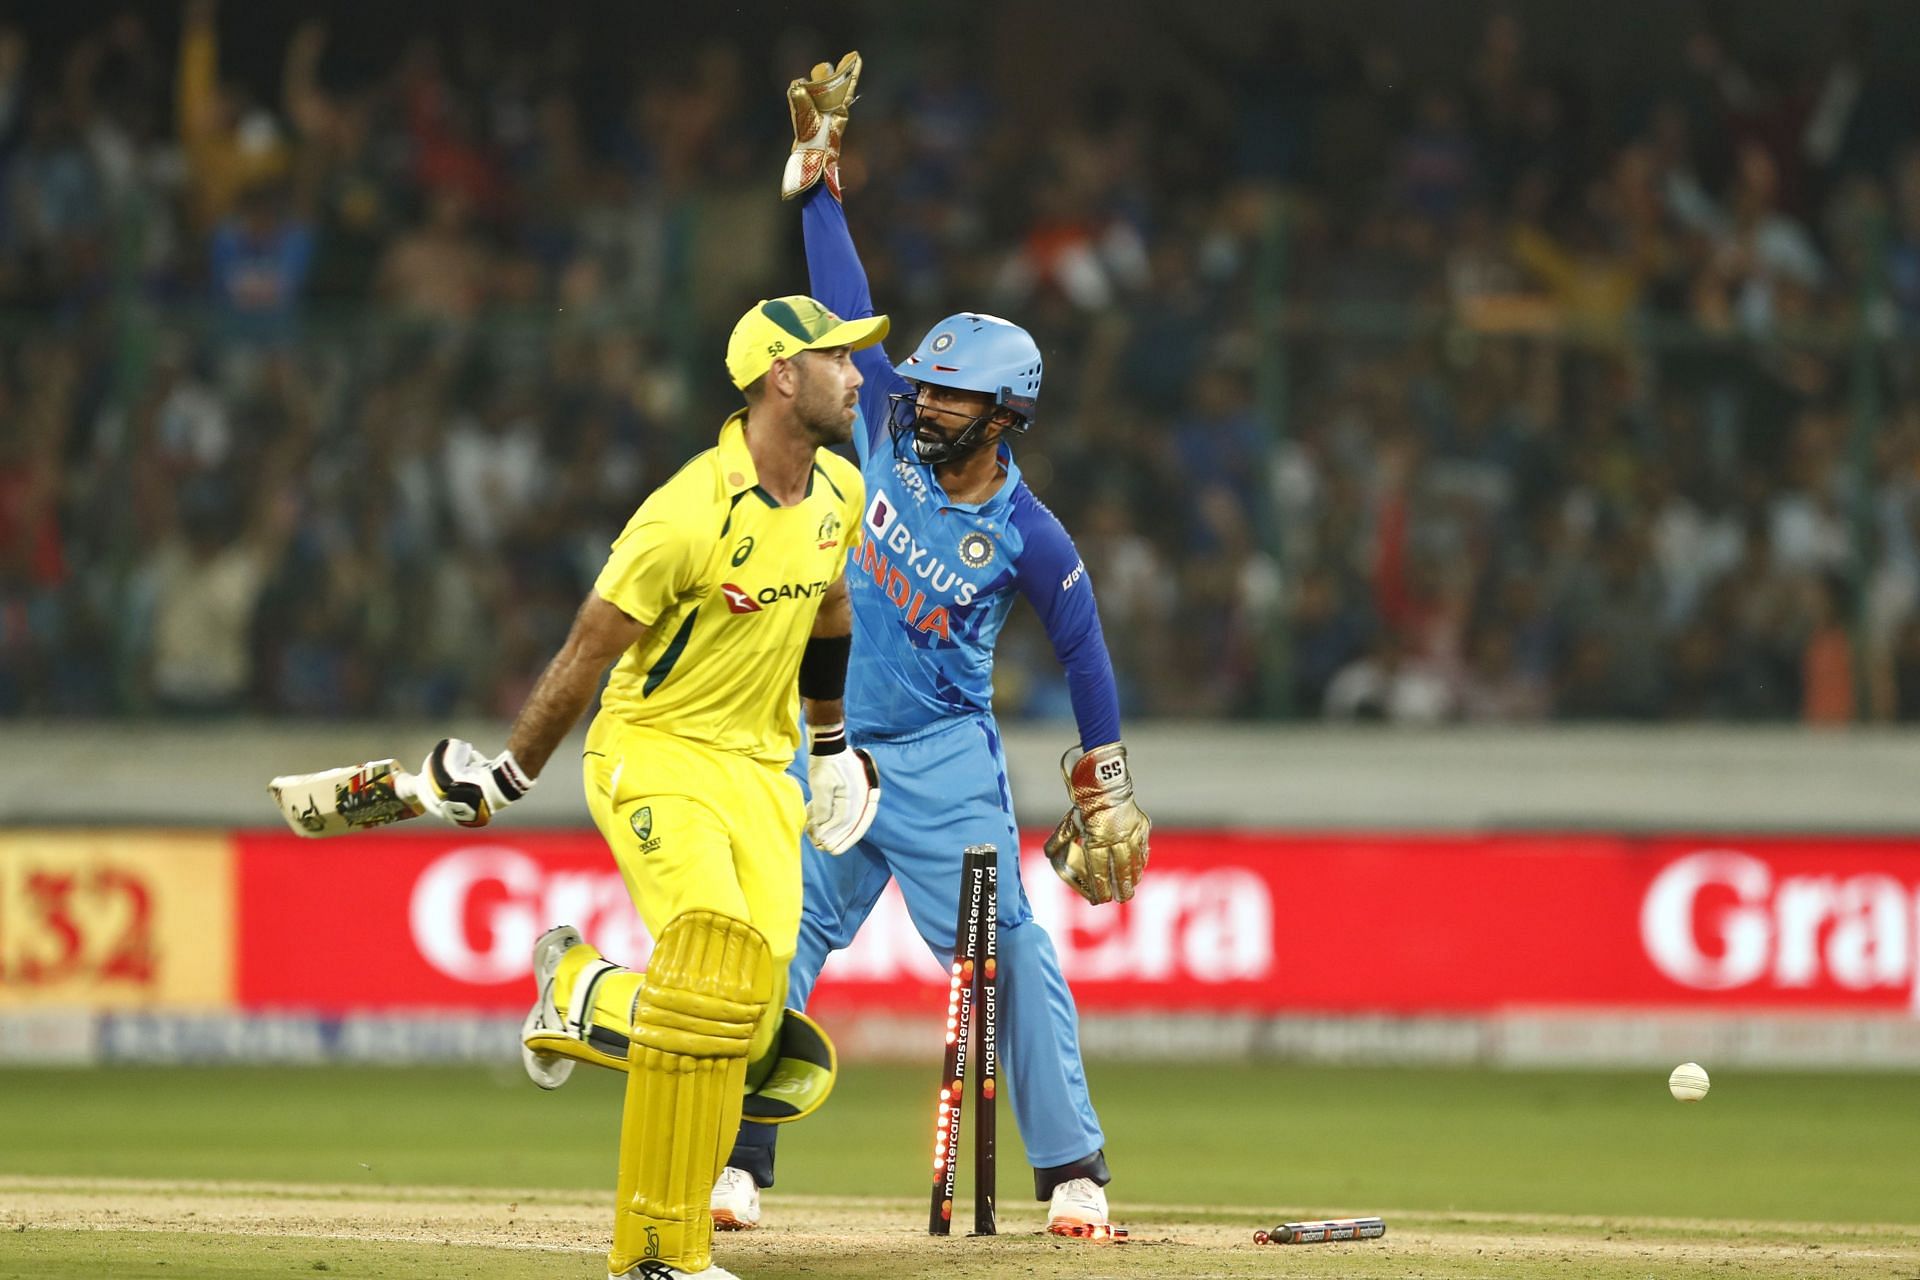 t20-world-cup-2022-warm-up-india-vs-australia-telecast-channel-list-and-live-streaming-details